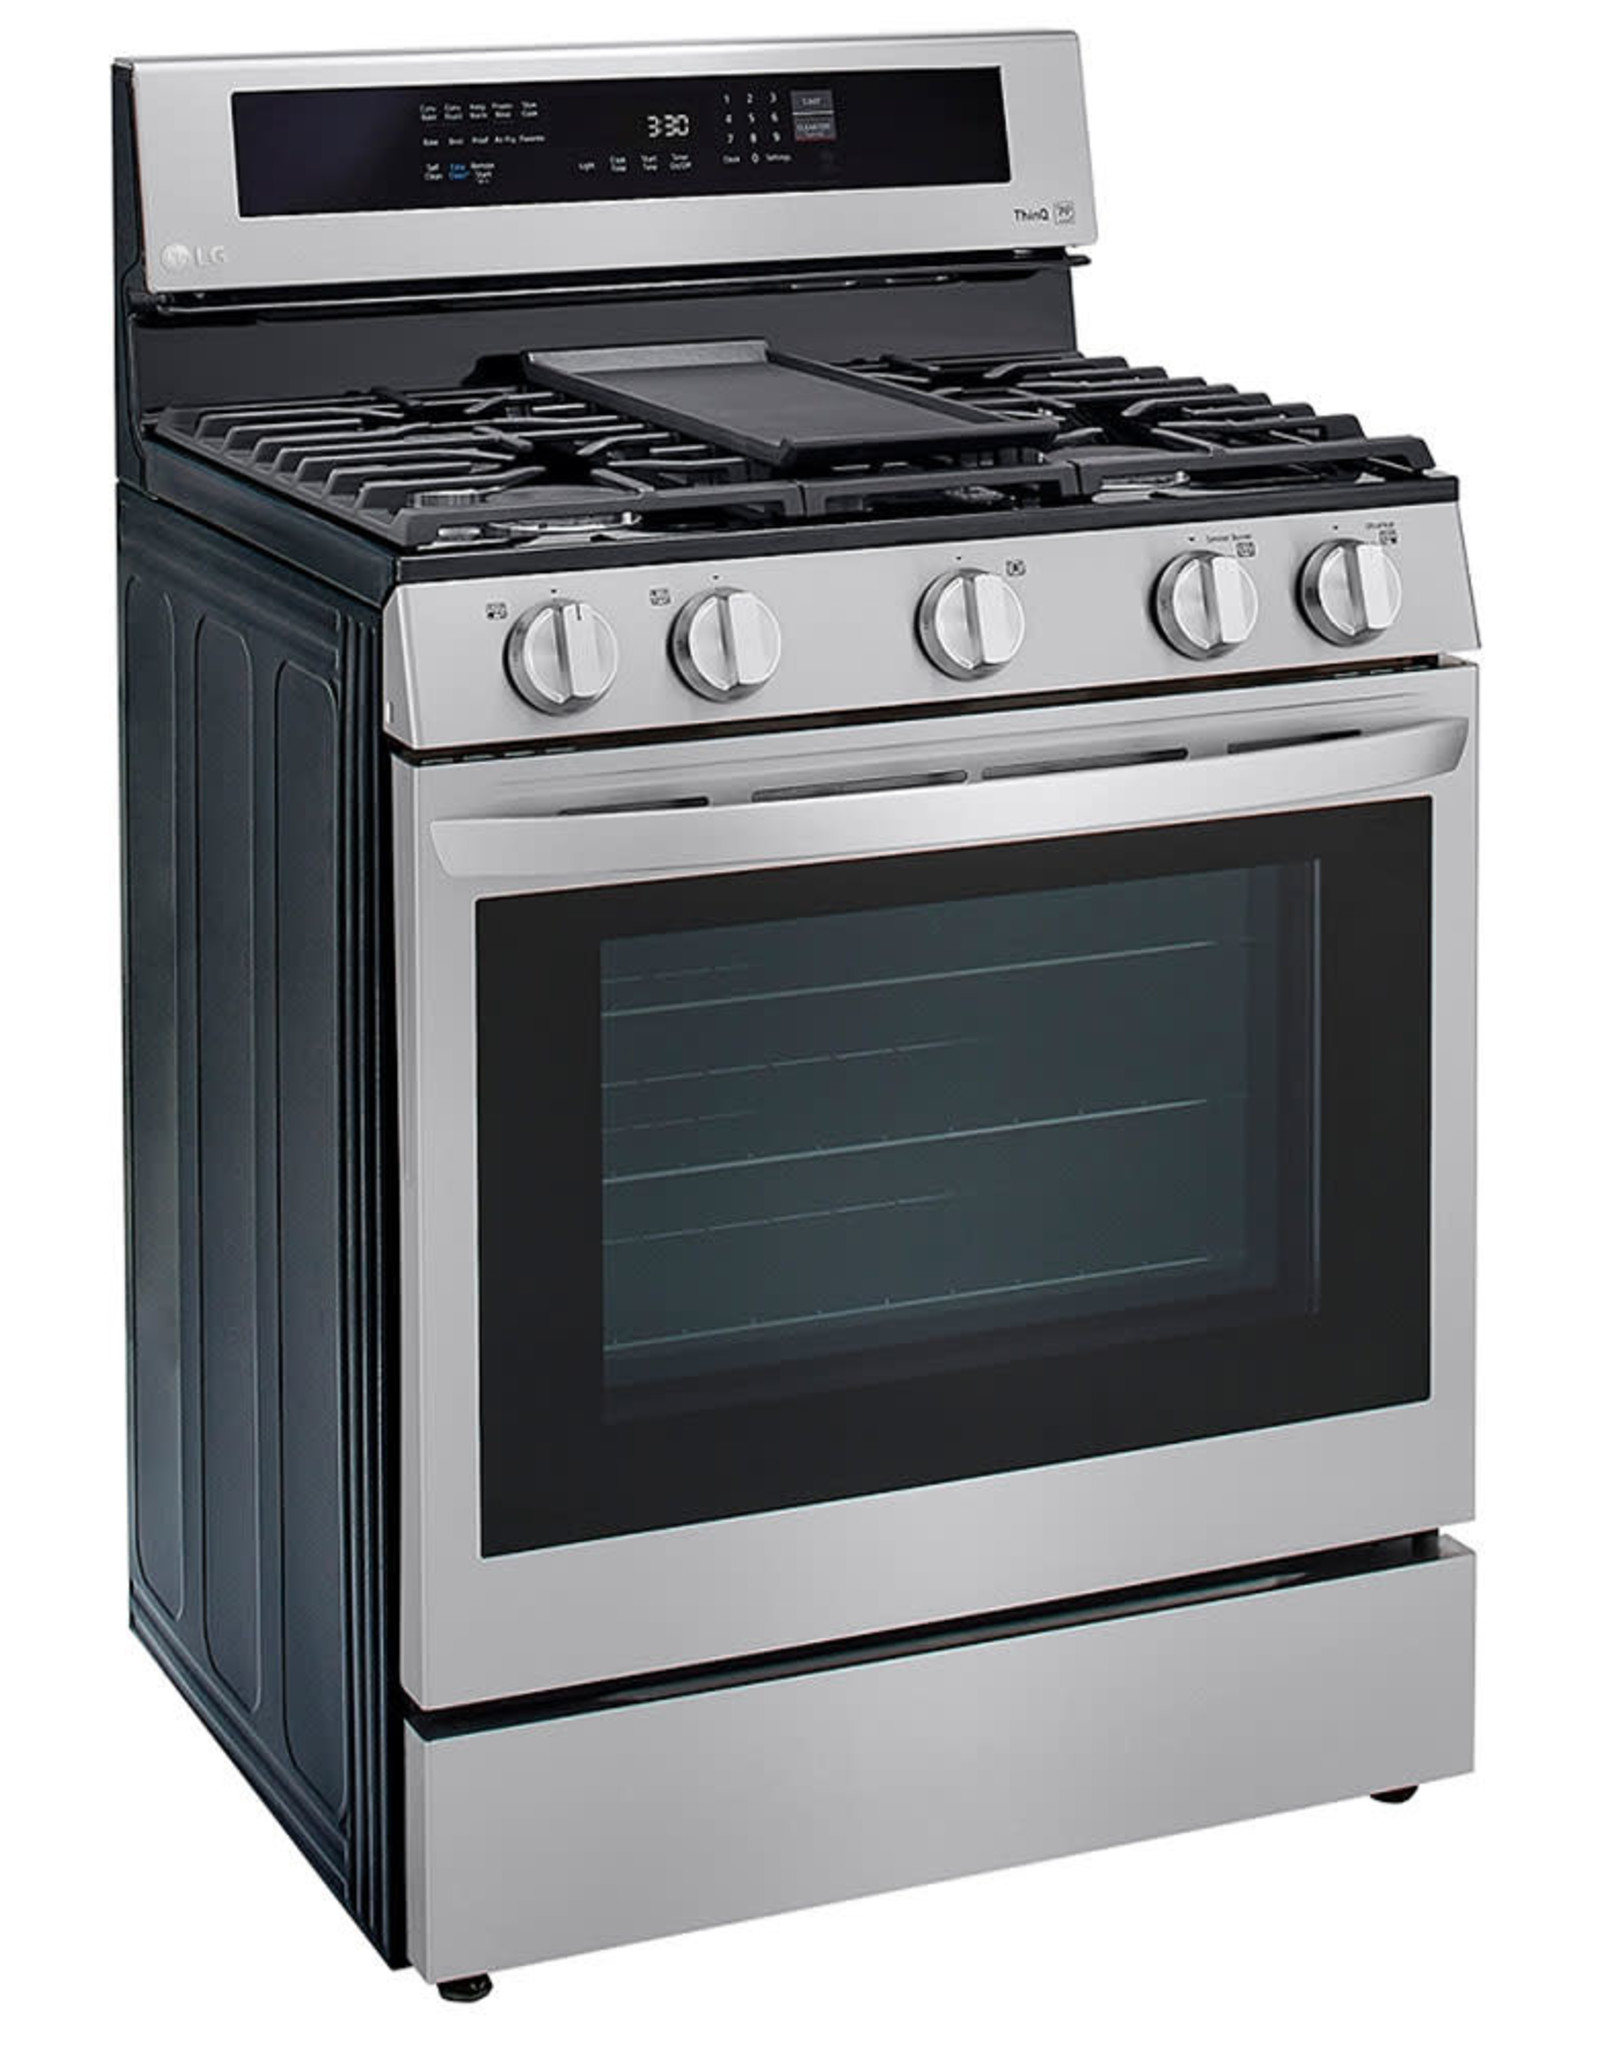 ( LRGL5825F 5.8 cu. ft. Smart Wi-Fi Enabled True Convection InstaView Gas Range Oven with Air Fry in Printproof Stainless Steel